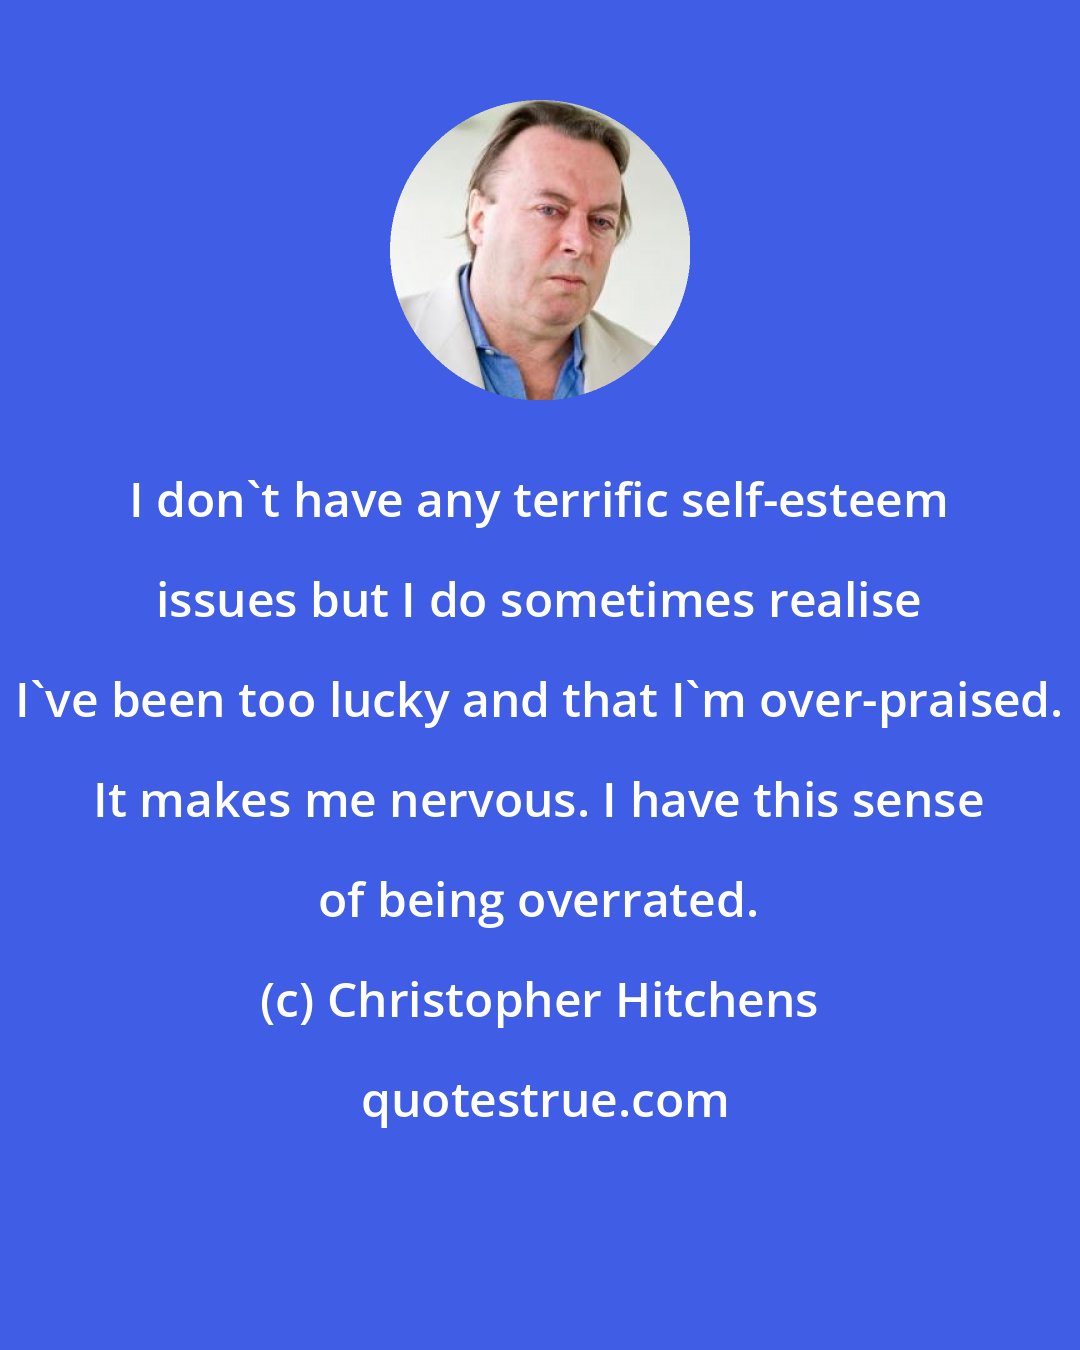 Christopher Hitchens: I don't have any terrific self-esteem issues but I do sometimes realise I've been too lucky and that I'm over-praised. It makes me nervous. I have this sense of being overrated.